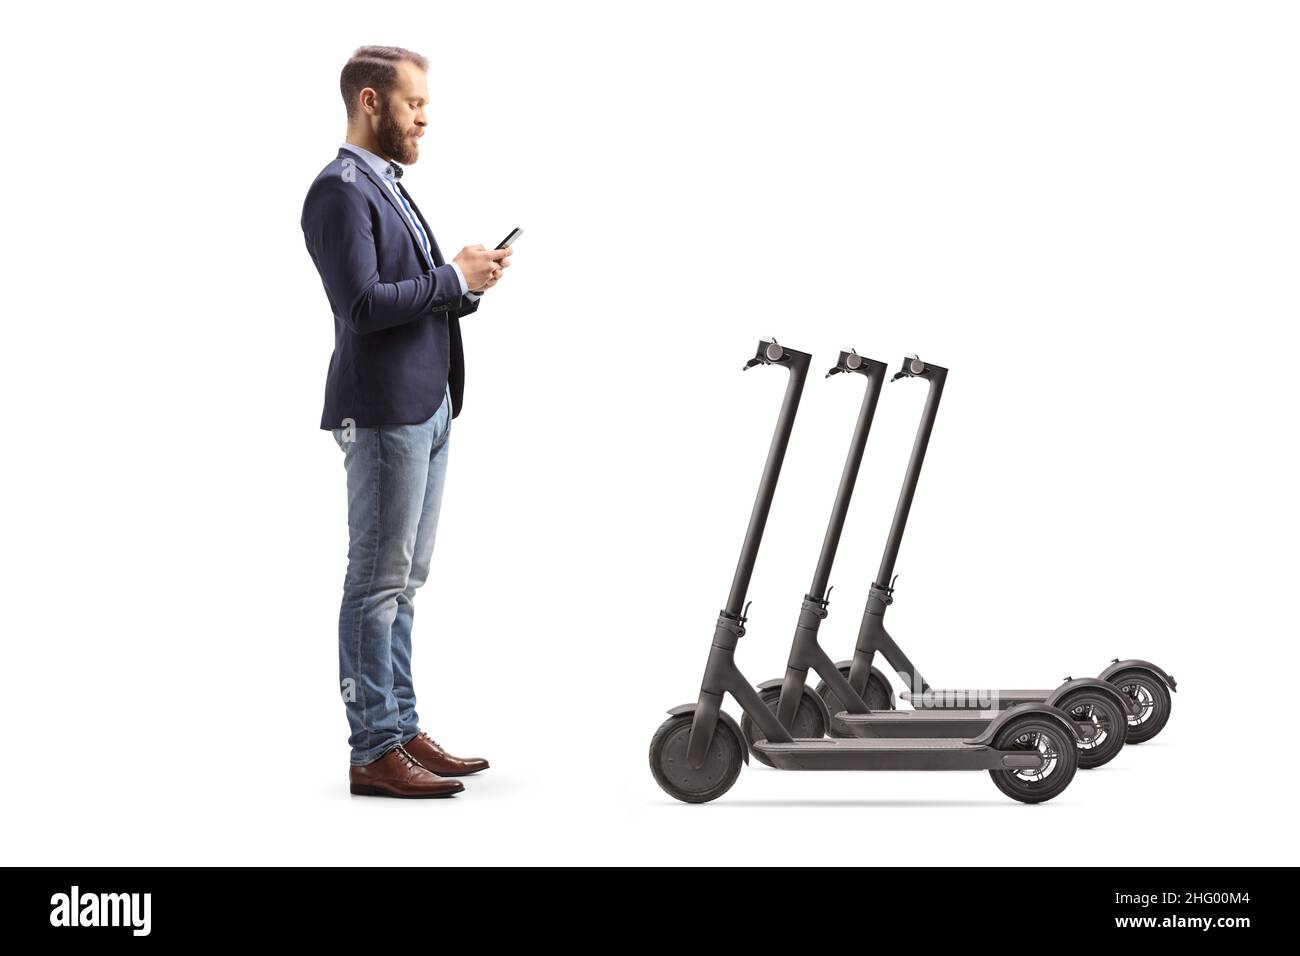 Full length profile shot of a man in suit and jeans renting an electric scooter isolated on white background Stock Photo